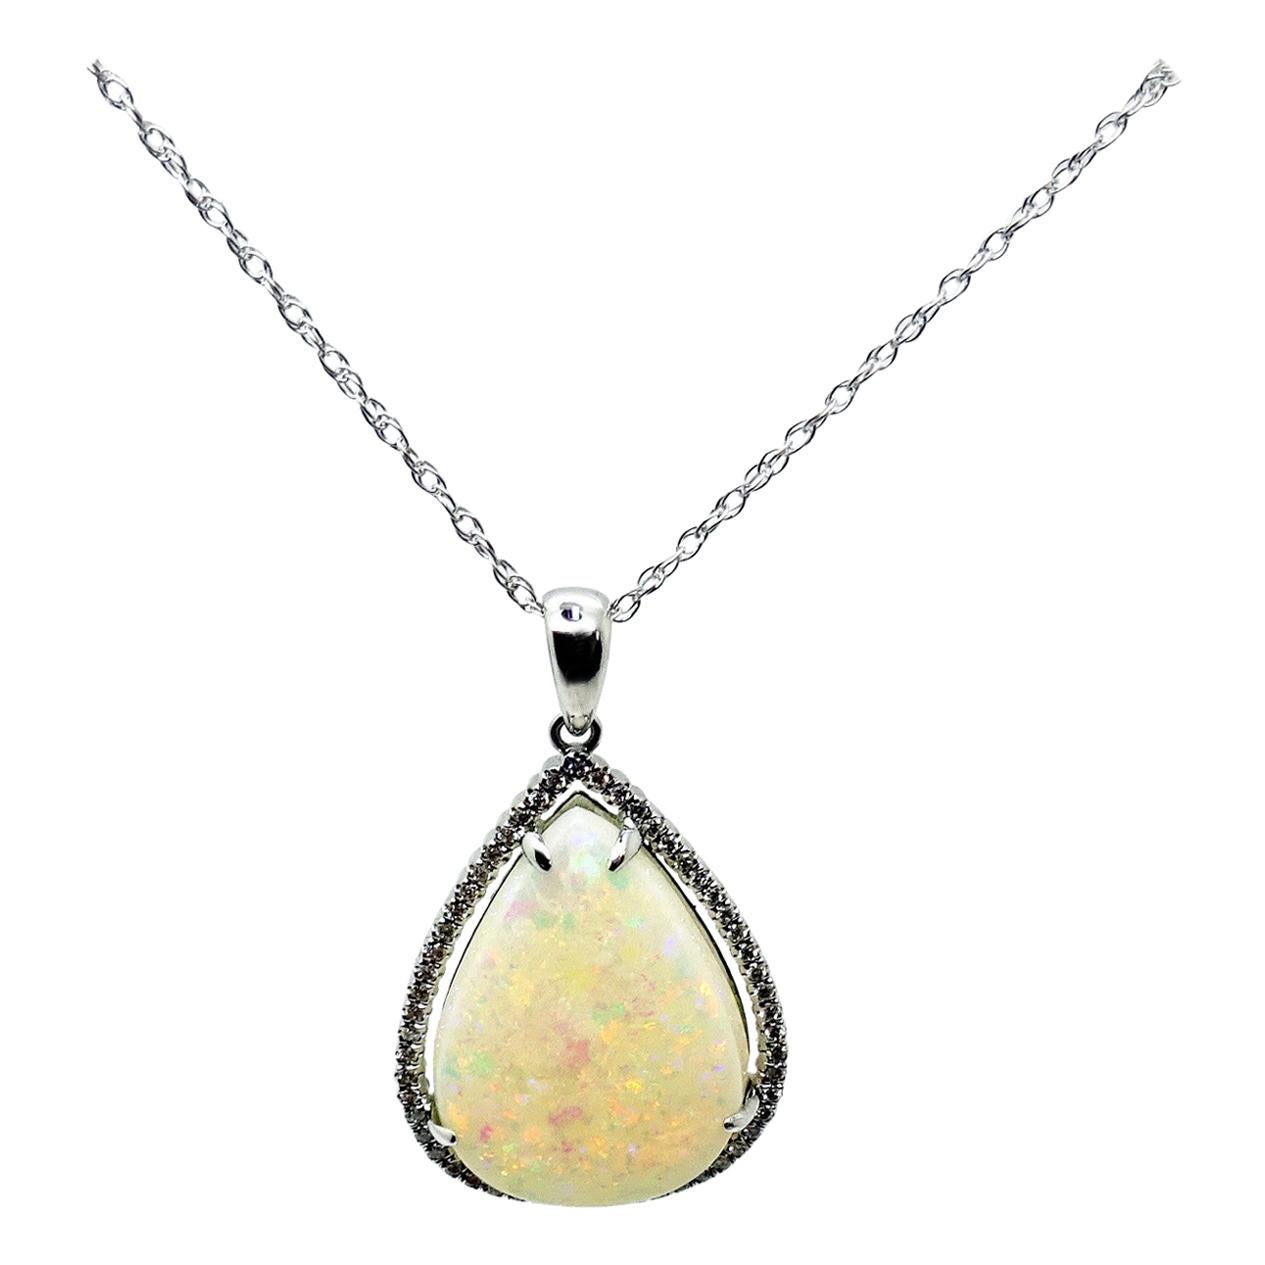 14k Gold 5.67ct Pear Genuine Natural Opal Pendant with .16ct Diamonds '#3427'